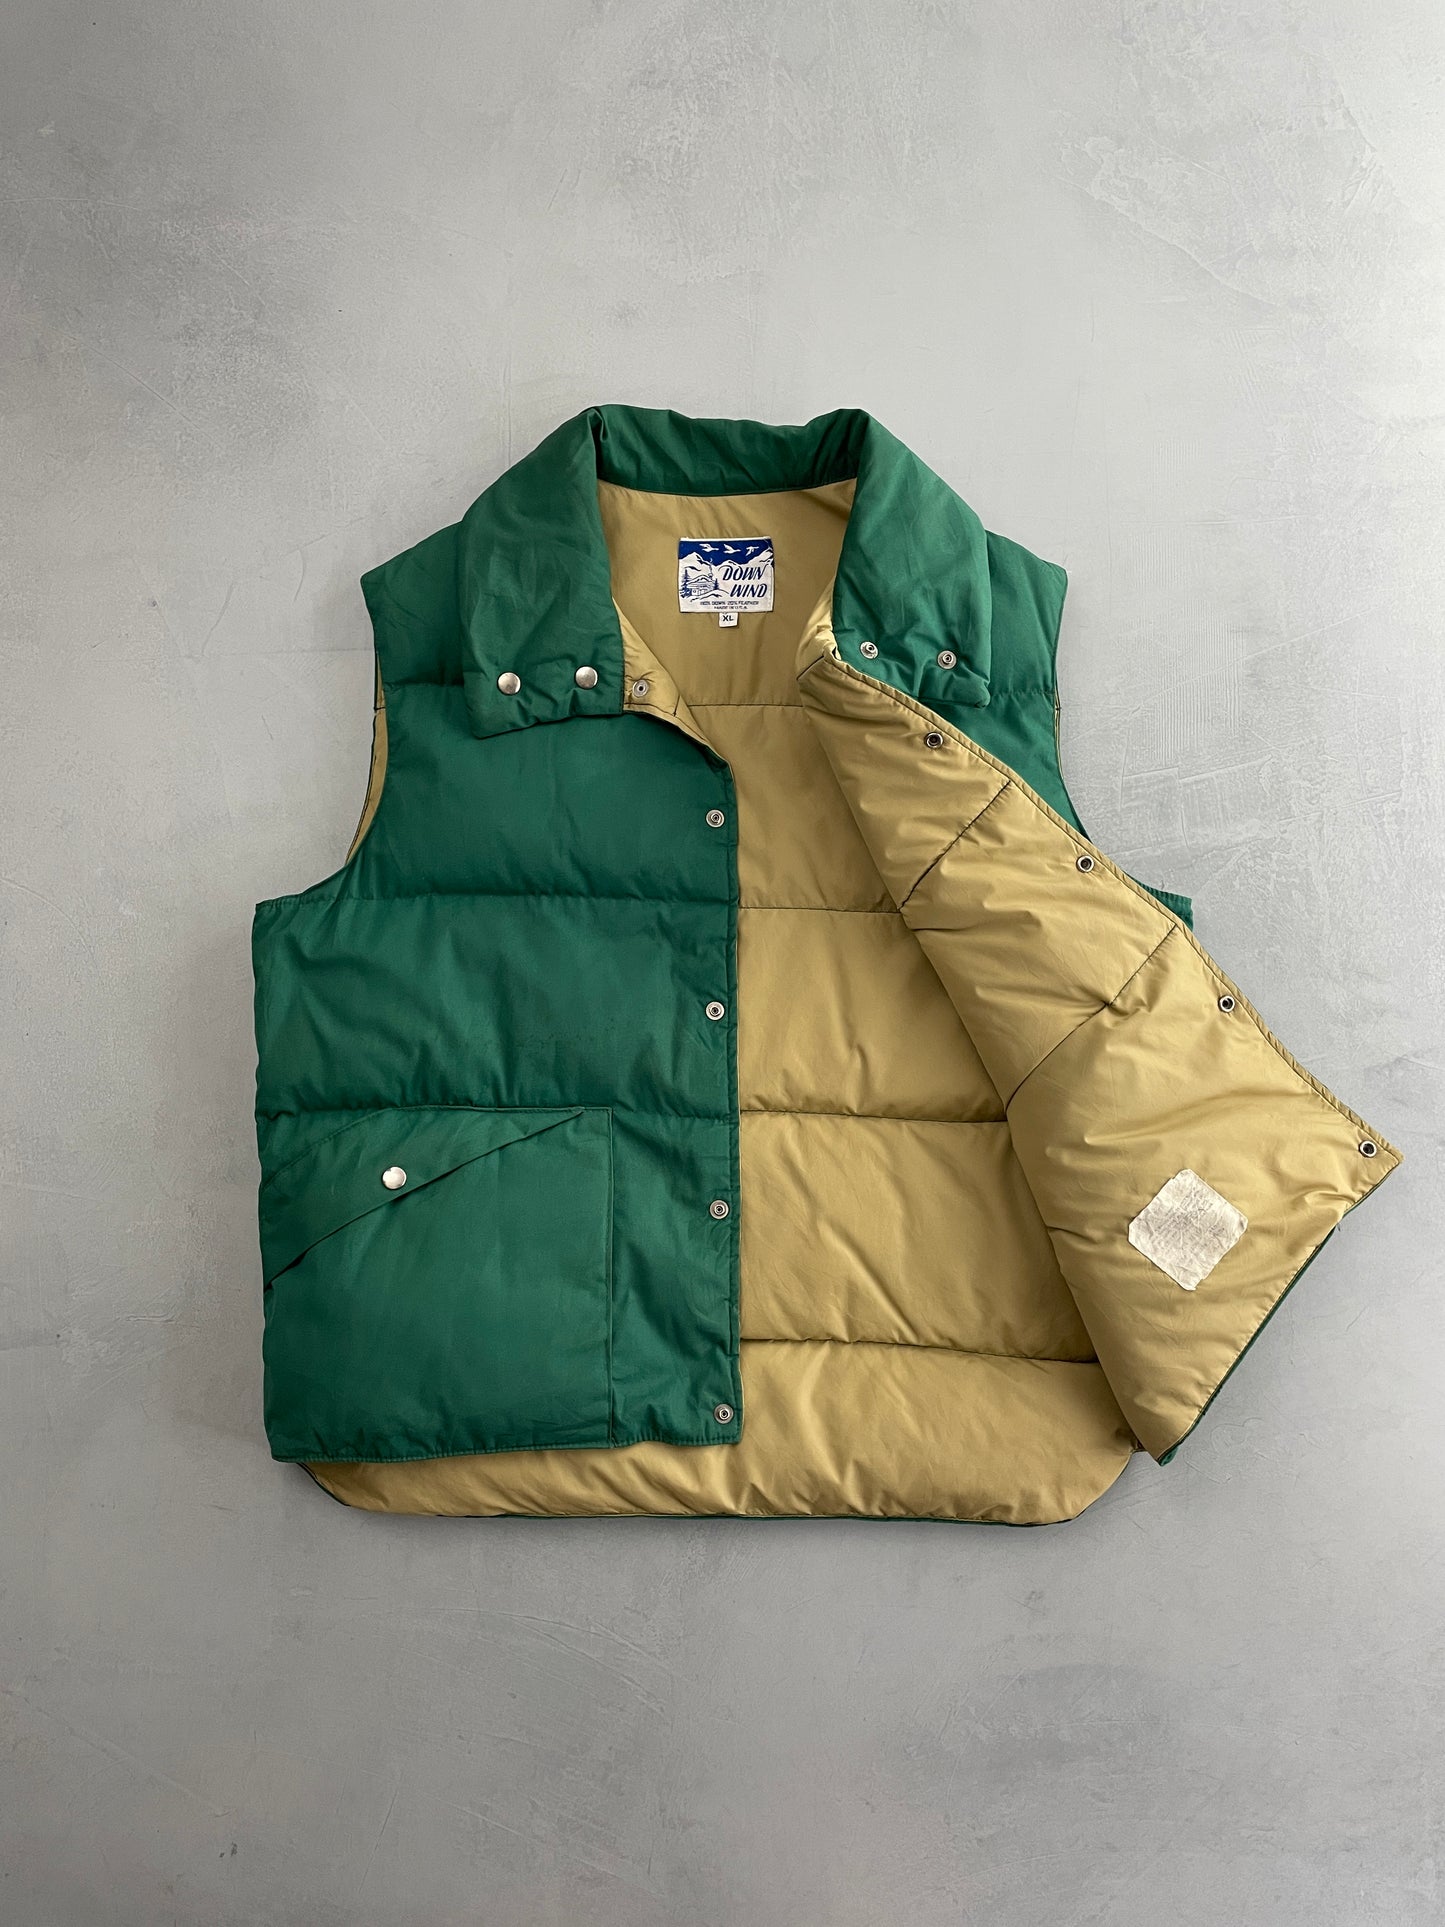 Down Wind Quilted Vest [XL]